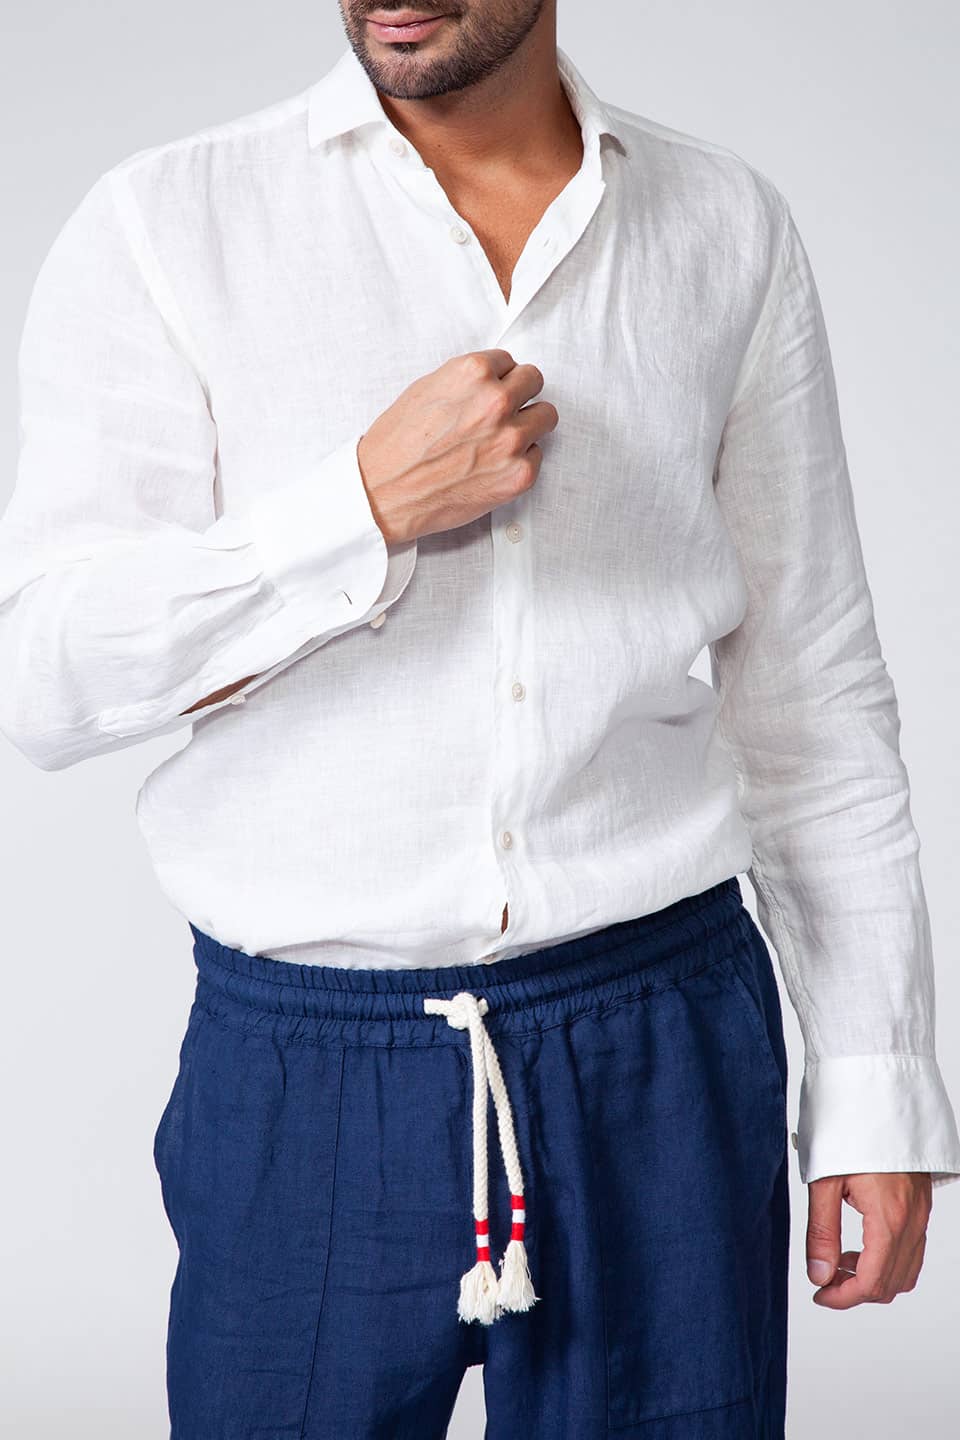 Thumbnail for Product gallery 6, Italian brand man linen trousers from MC2 Saint Barth in blue color, with white linen shirt